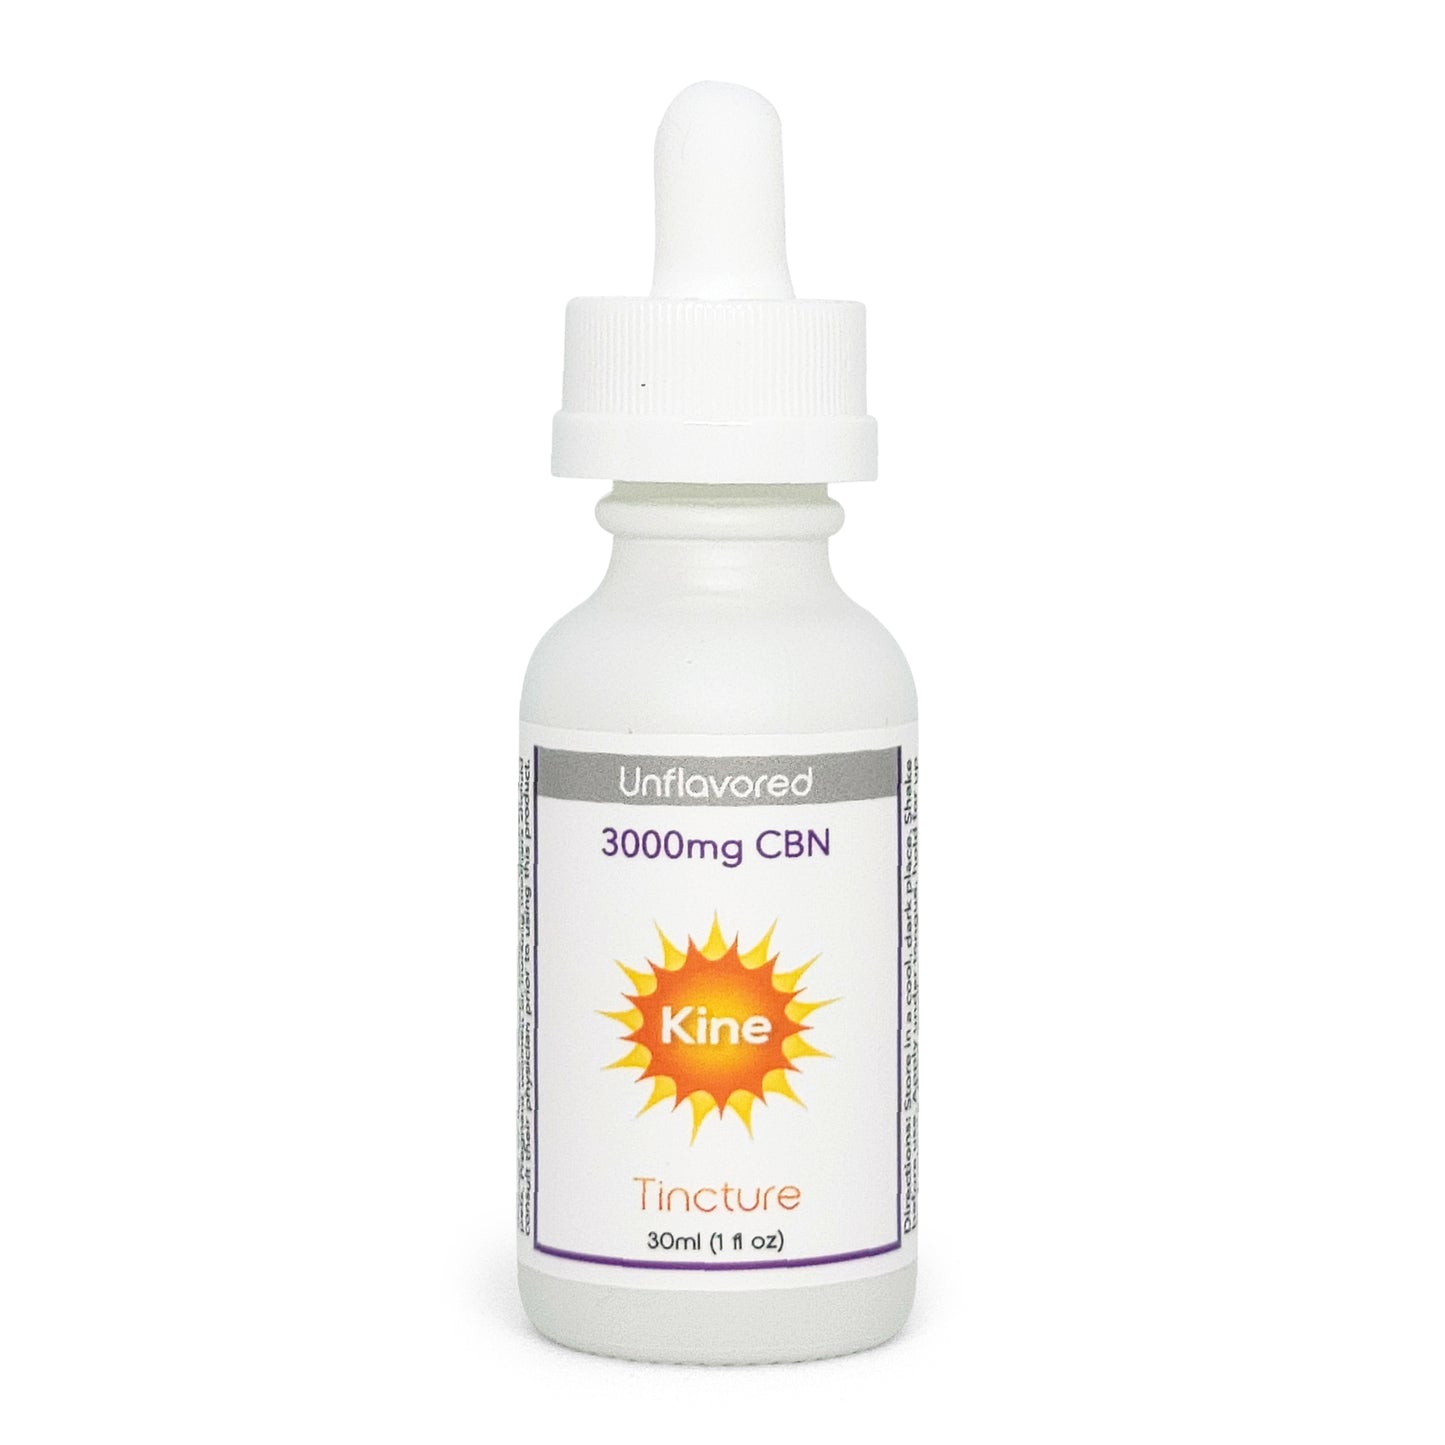 Kine Unflavored Neutral Organic CBN 3000mg tincture drops